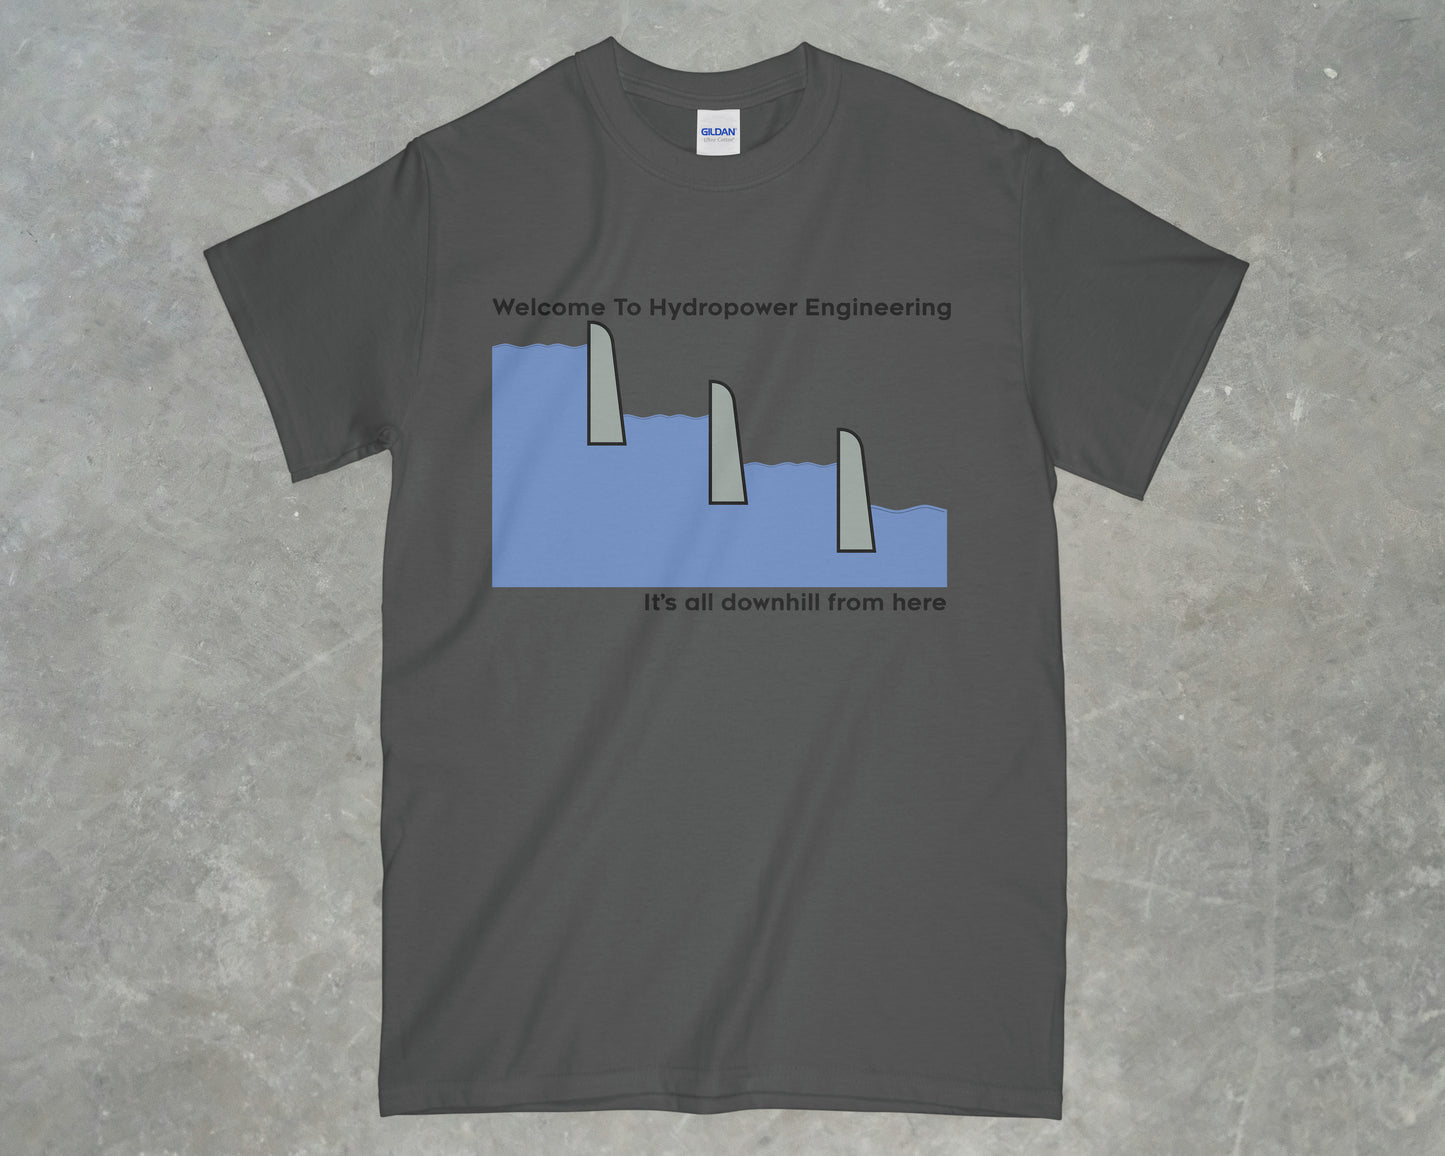 It's All Downhill from here Shirt